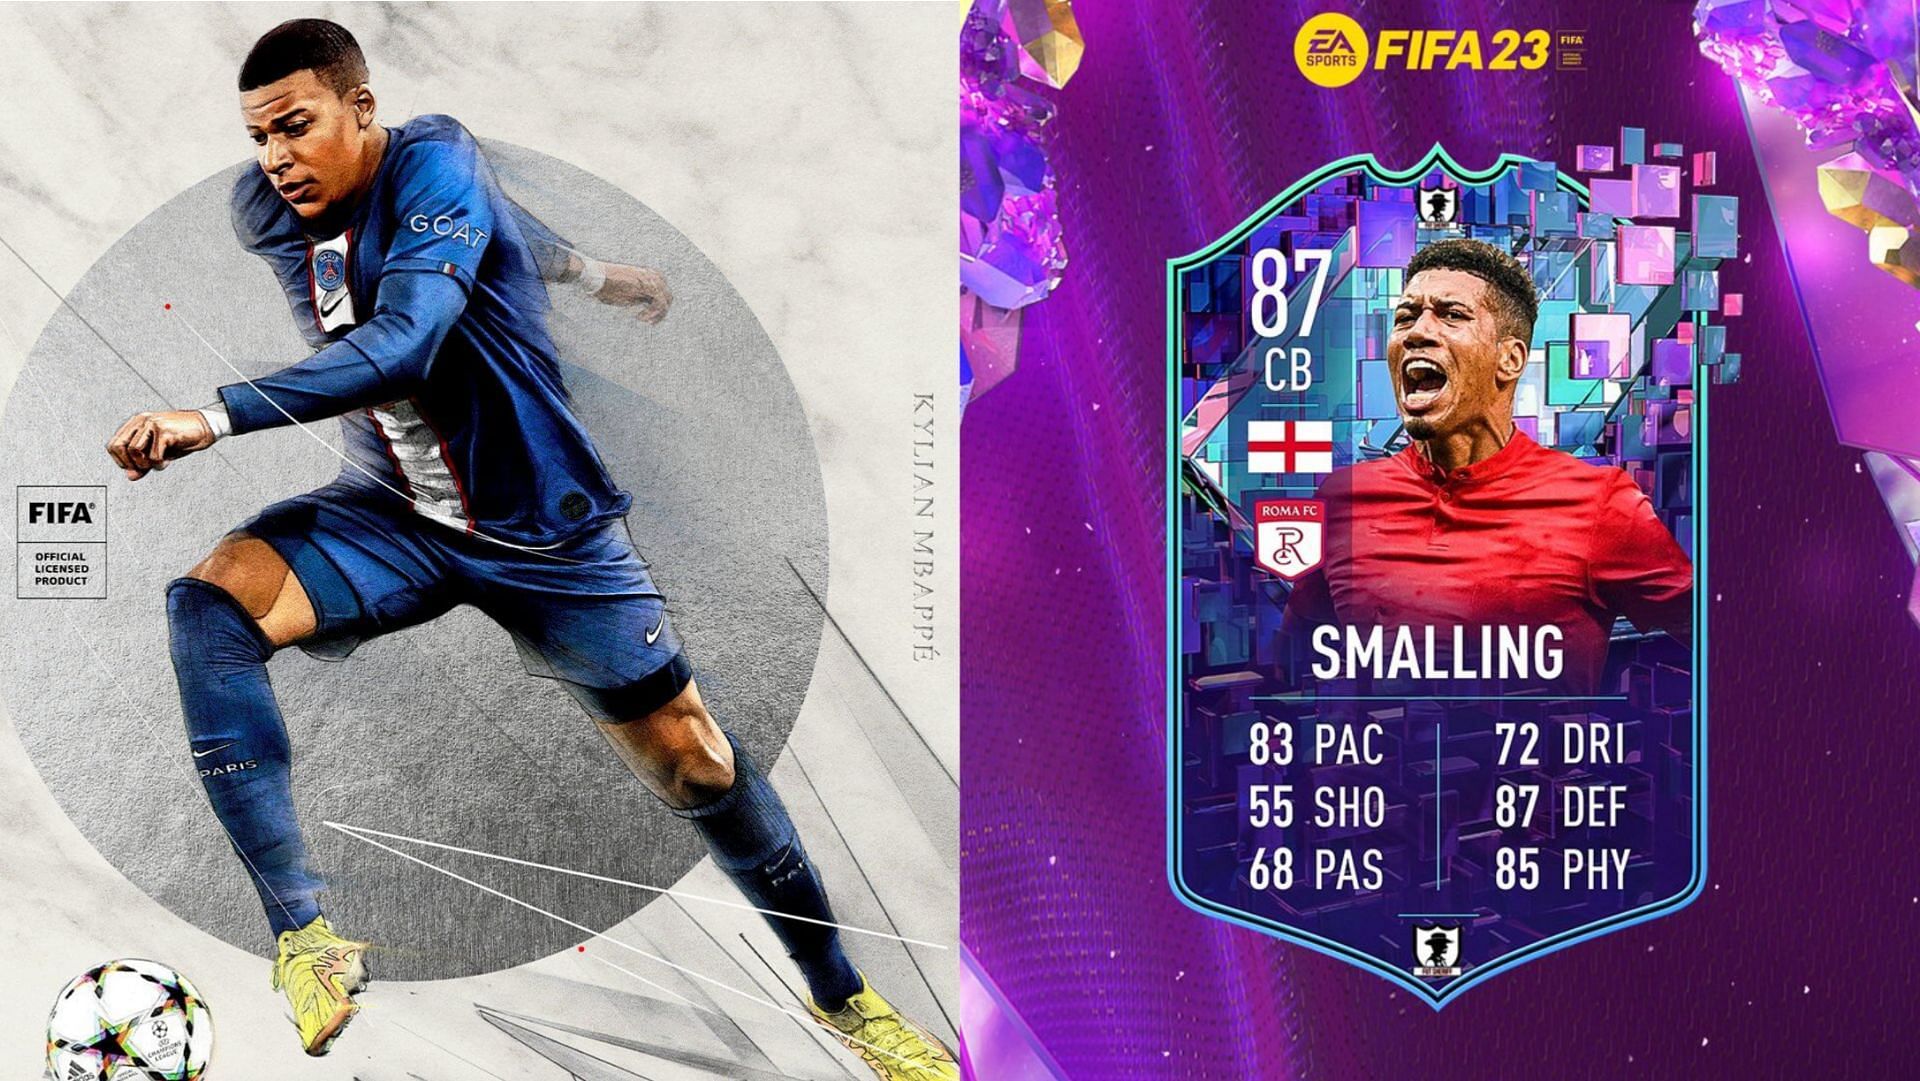 FIFA 23 players could have an underrated option when the Chris Smalling Flashback SBC arrives in Ultimate Team (Images via EA Sports, Twitter/FUT Sheriff)